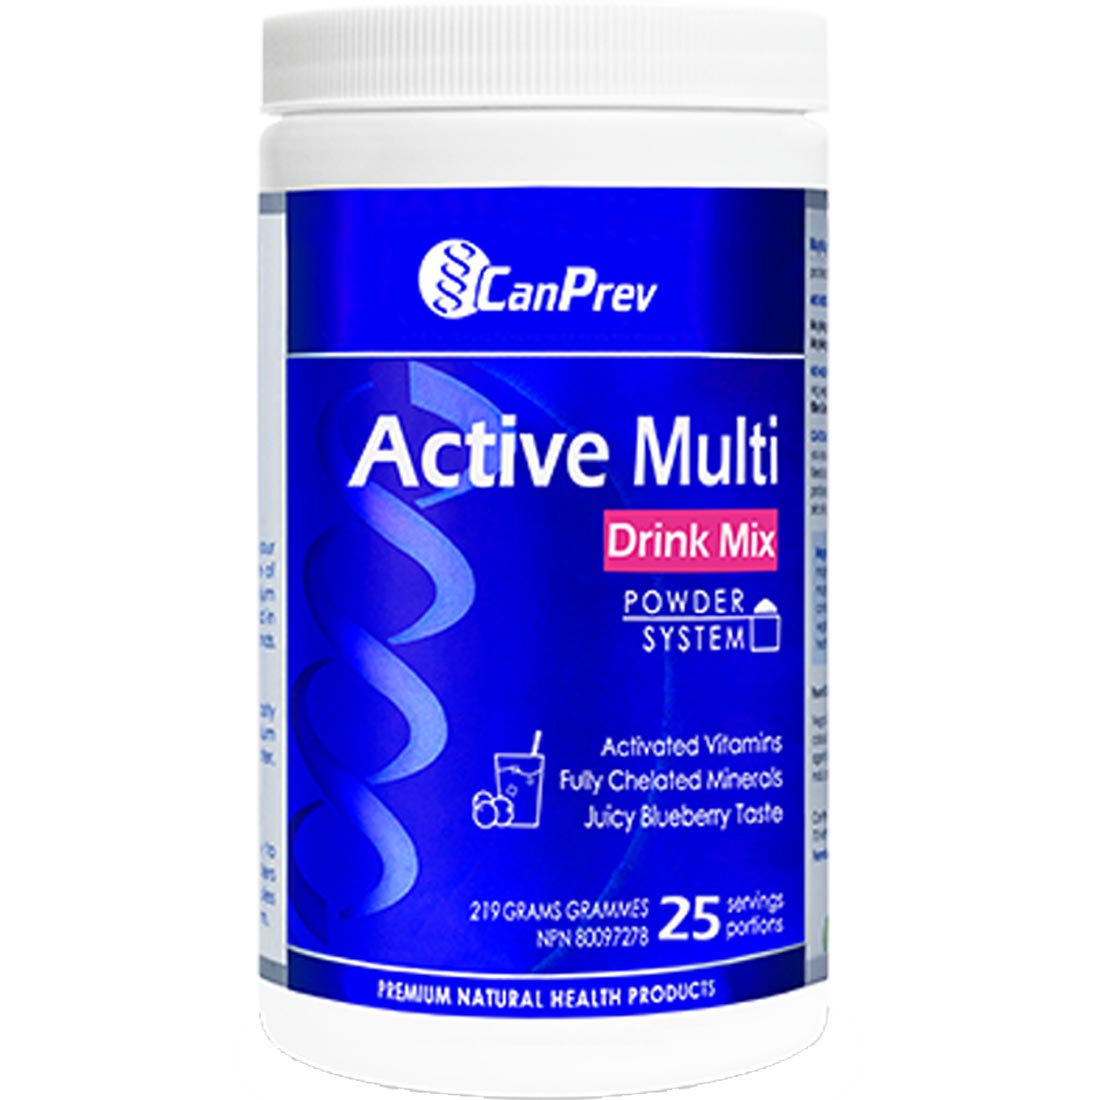 CanPrev Active Multi Drink Mix - Juicy Blueberry, 219 g